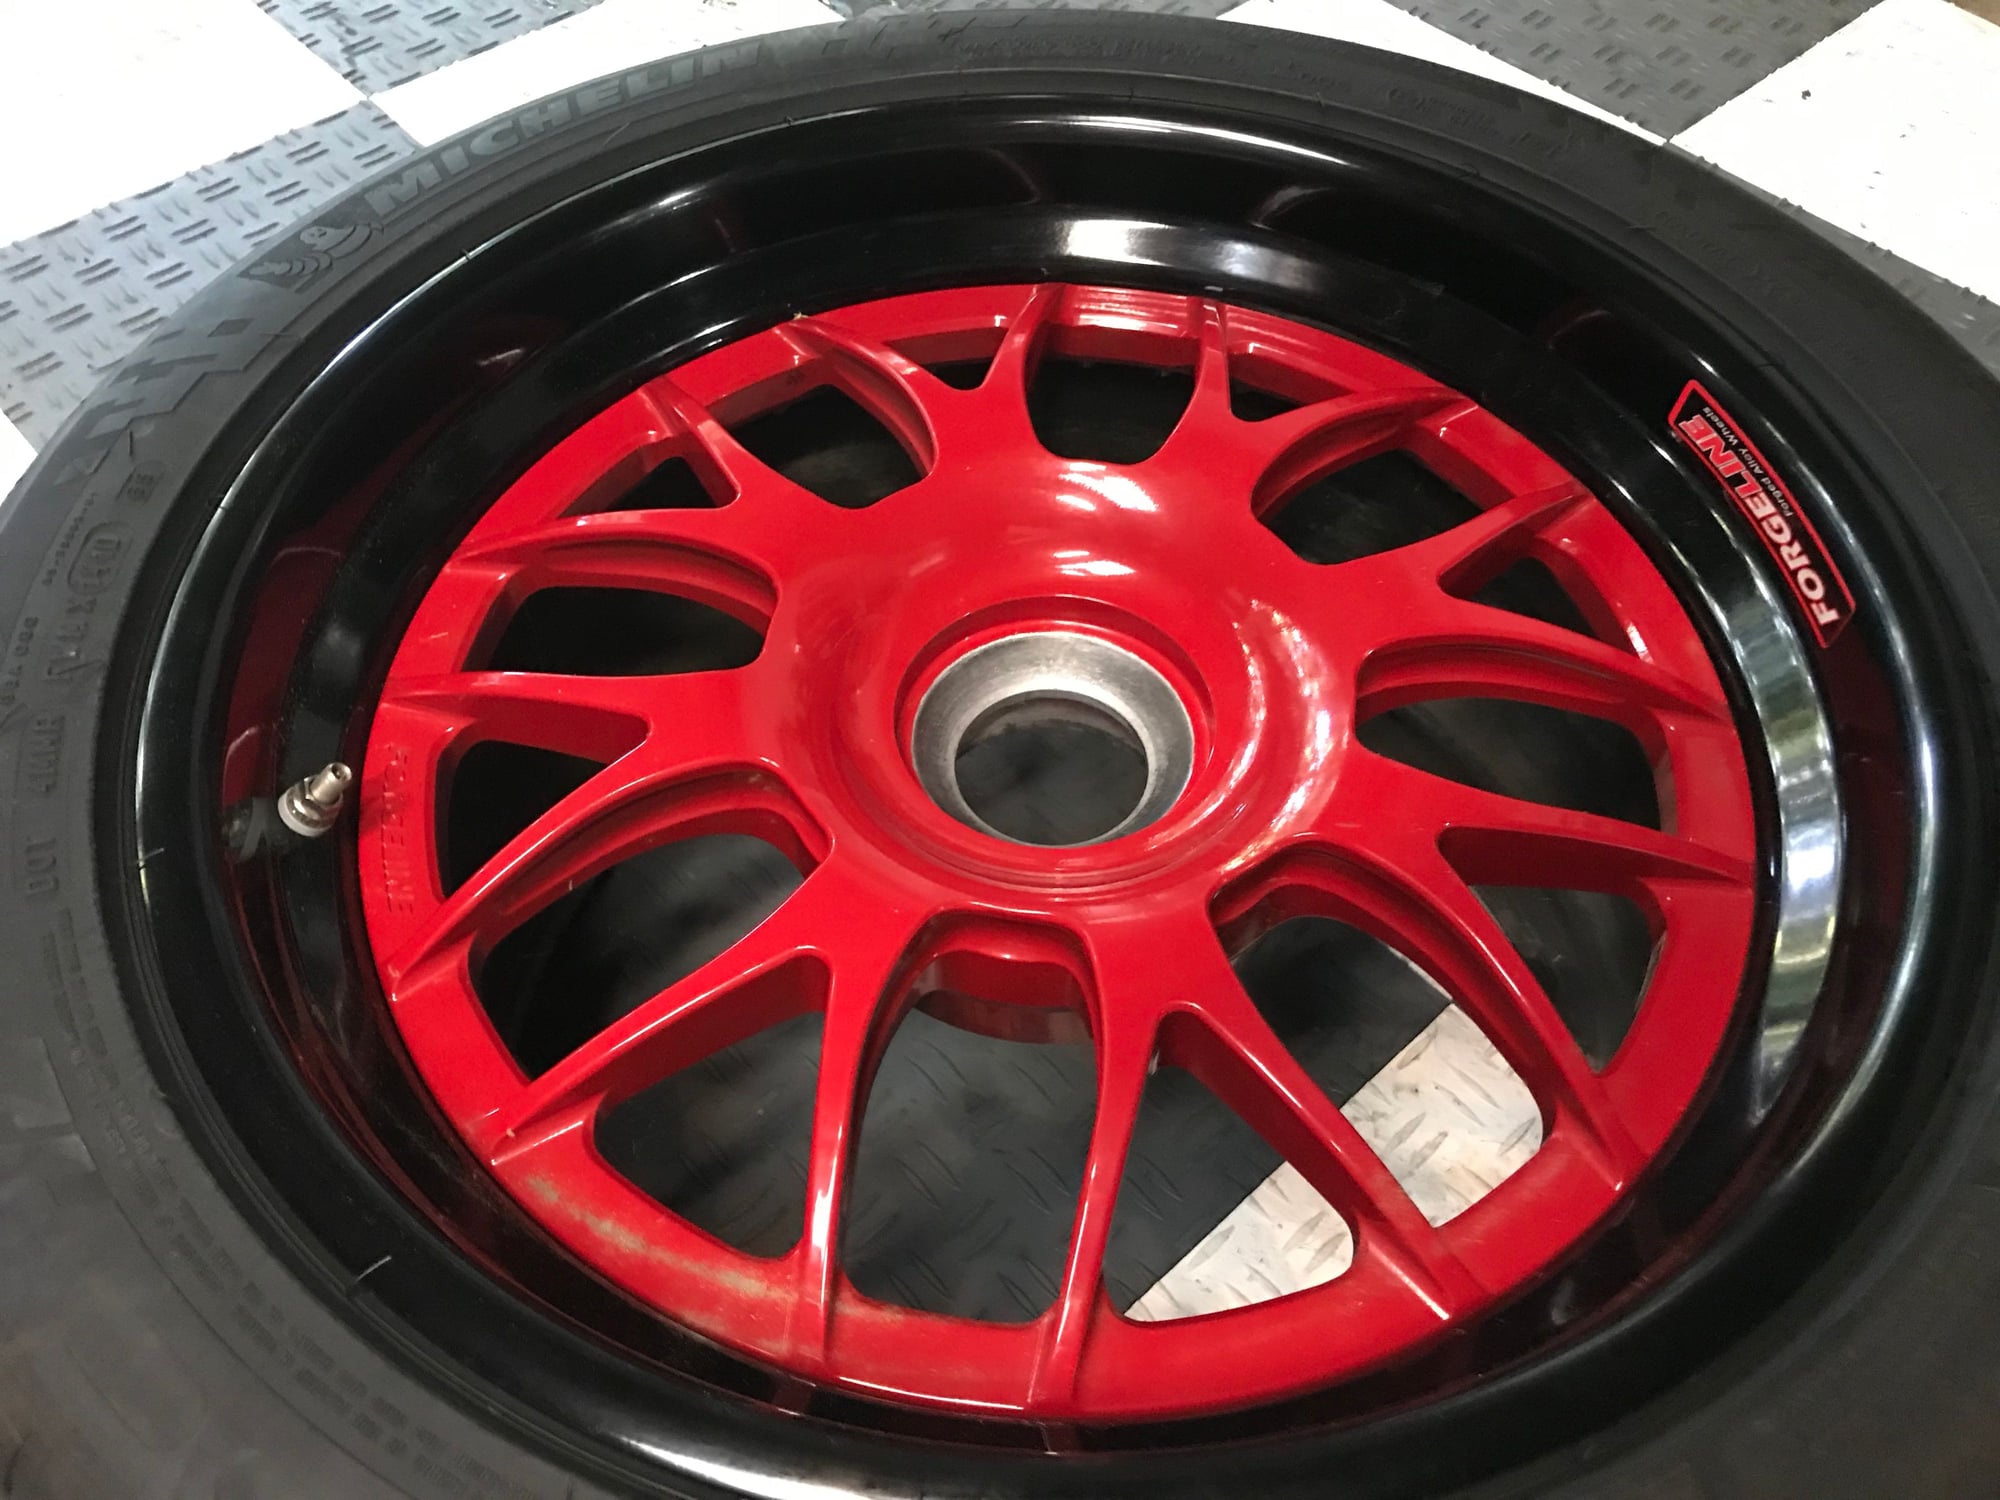 Wheels and Tires/Axles - 997.2 GT3 RS Forgeline GA3C Wheels 18" in Guards Red clears PCCBs - Used - 2010 to 2012 Porsche GT3 - San Francisco, CA 94109, United States